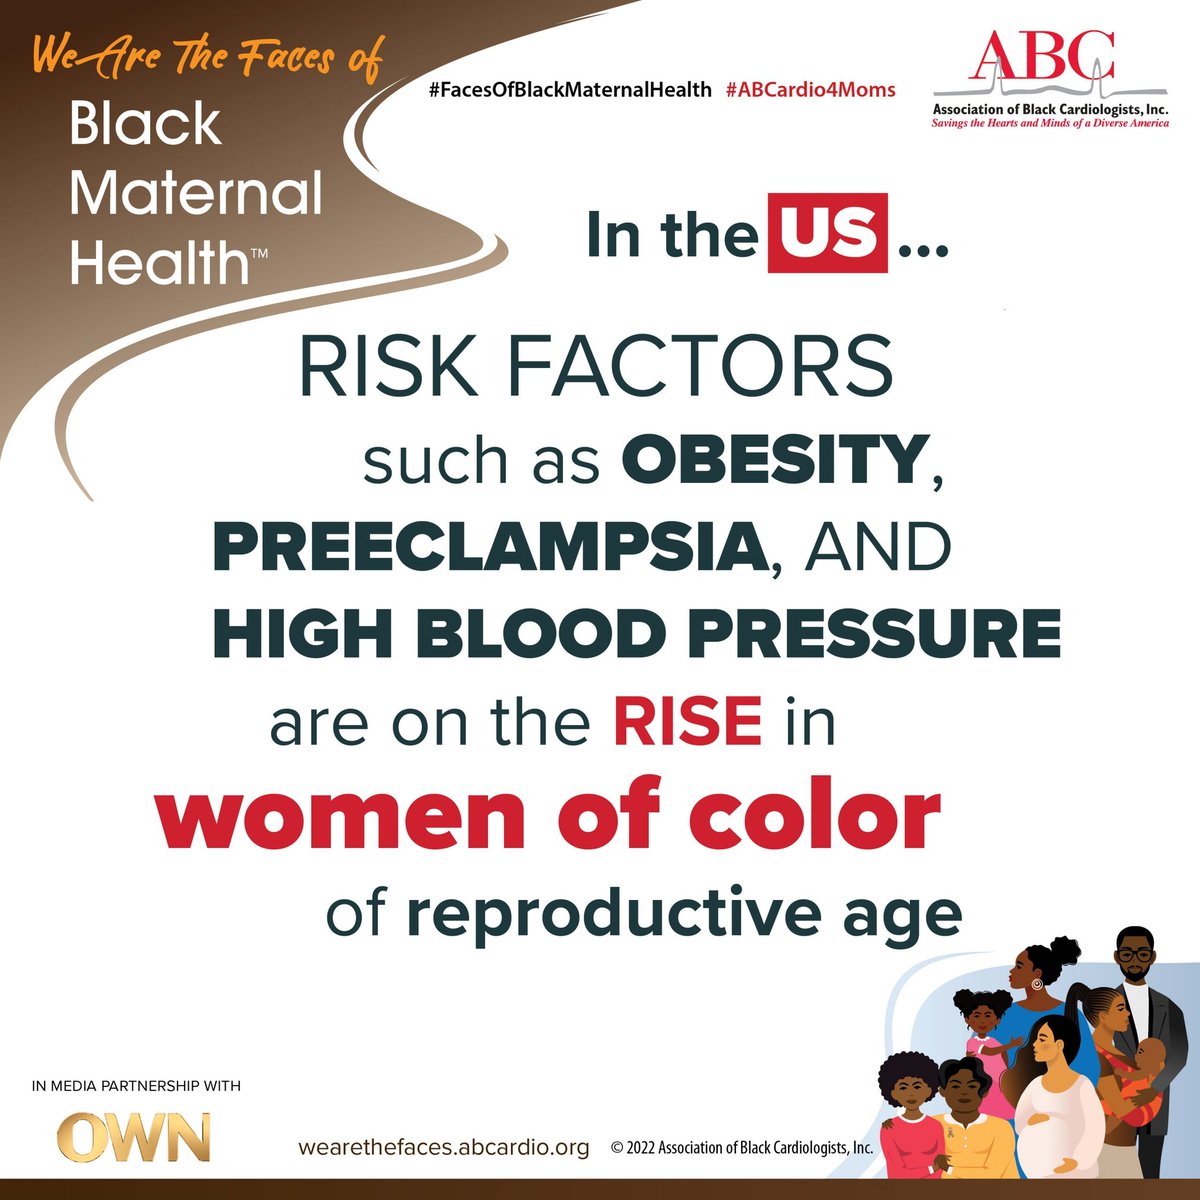 Thanks to friends @ABCardio1 for spreading awareness of #preeclampsia #obesity and #highbloodpressure with their #FacesofBlackMaternalHealth Campaign: wearethefaces.abcardio.org #MakeShiftHappen